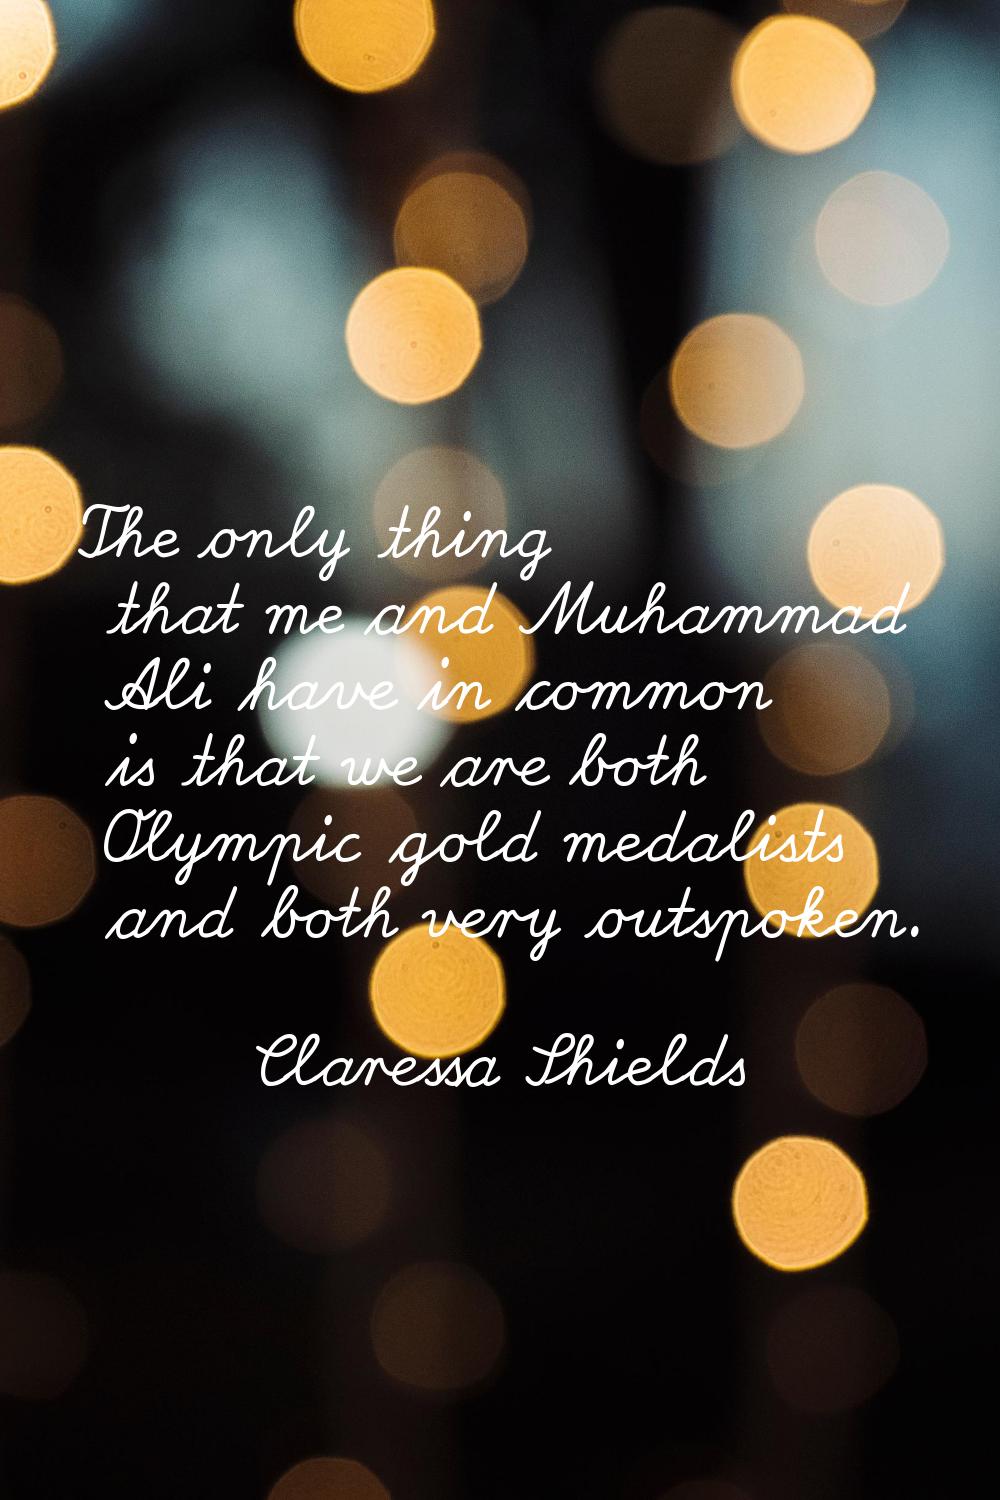 The only thing that me and Muhammad Ali have in common is that we are both Olympic gold medalists a